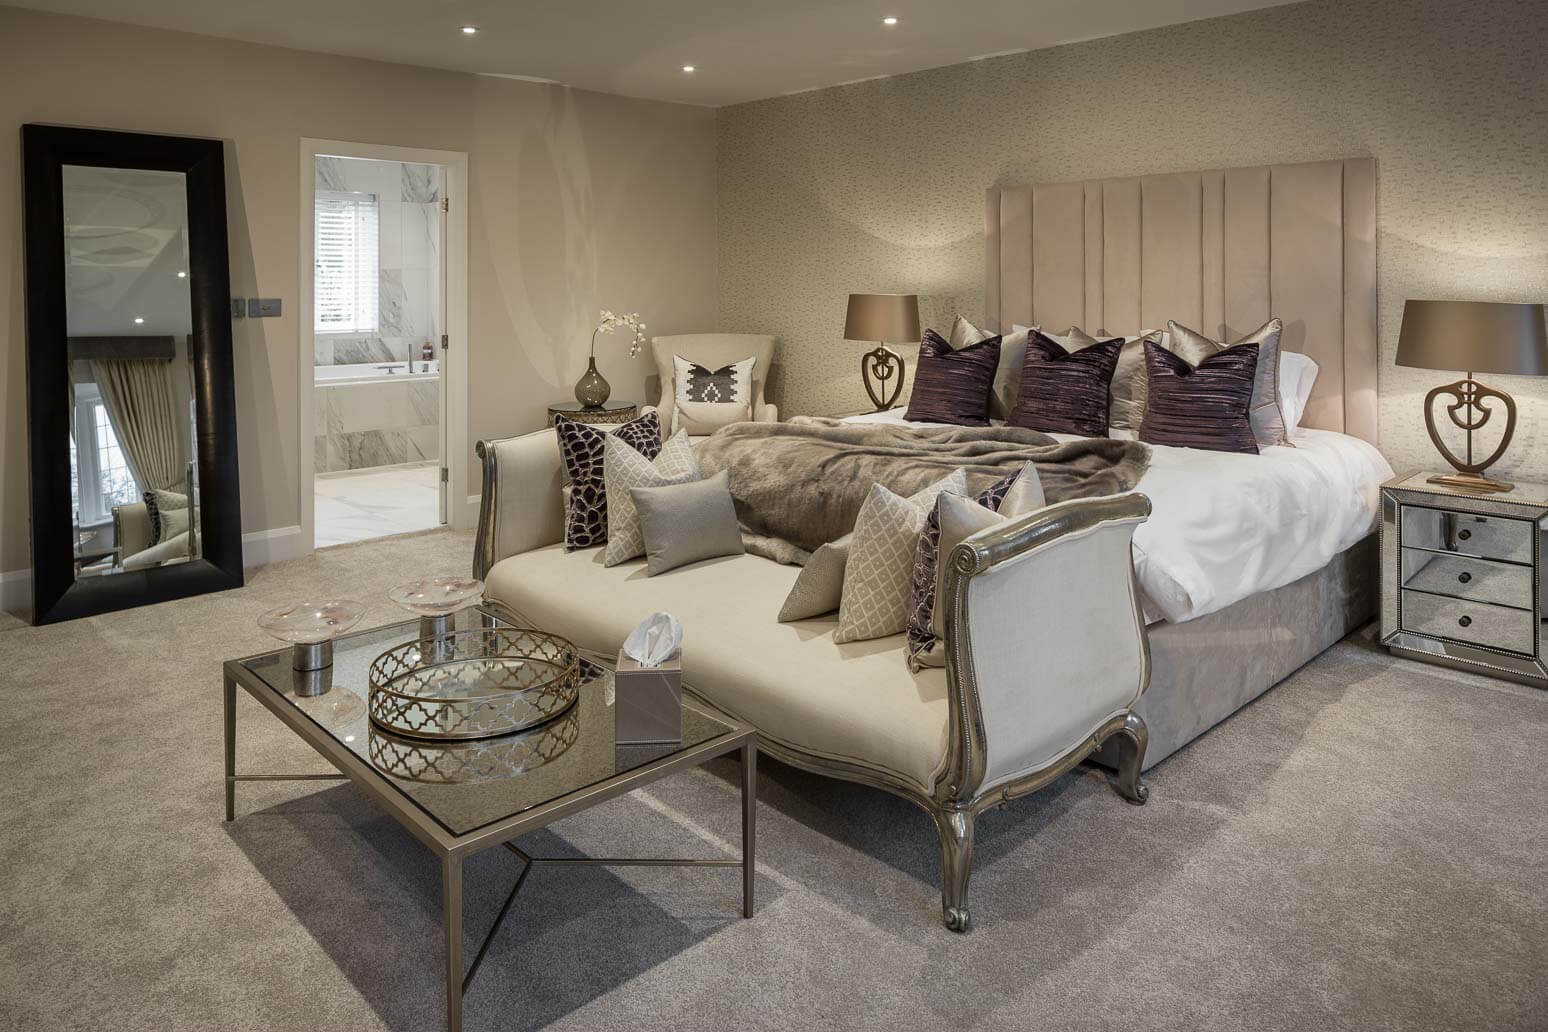 Commercial architecture and interiors photography - Luxury residential home, Cheshire